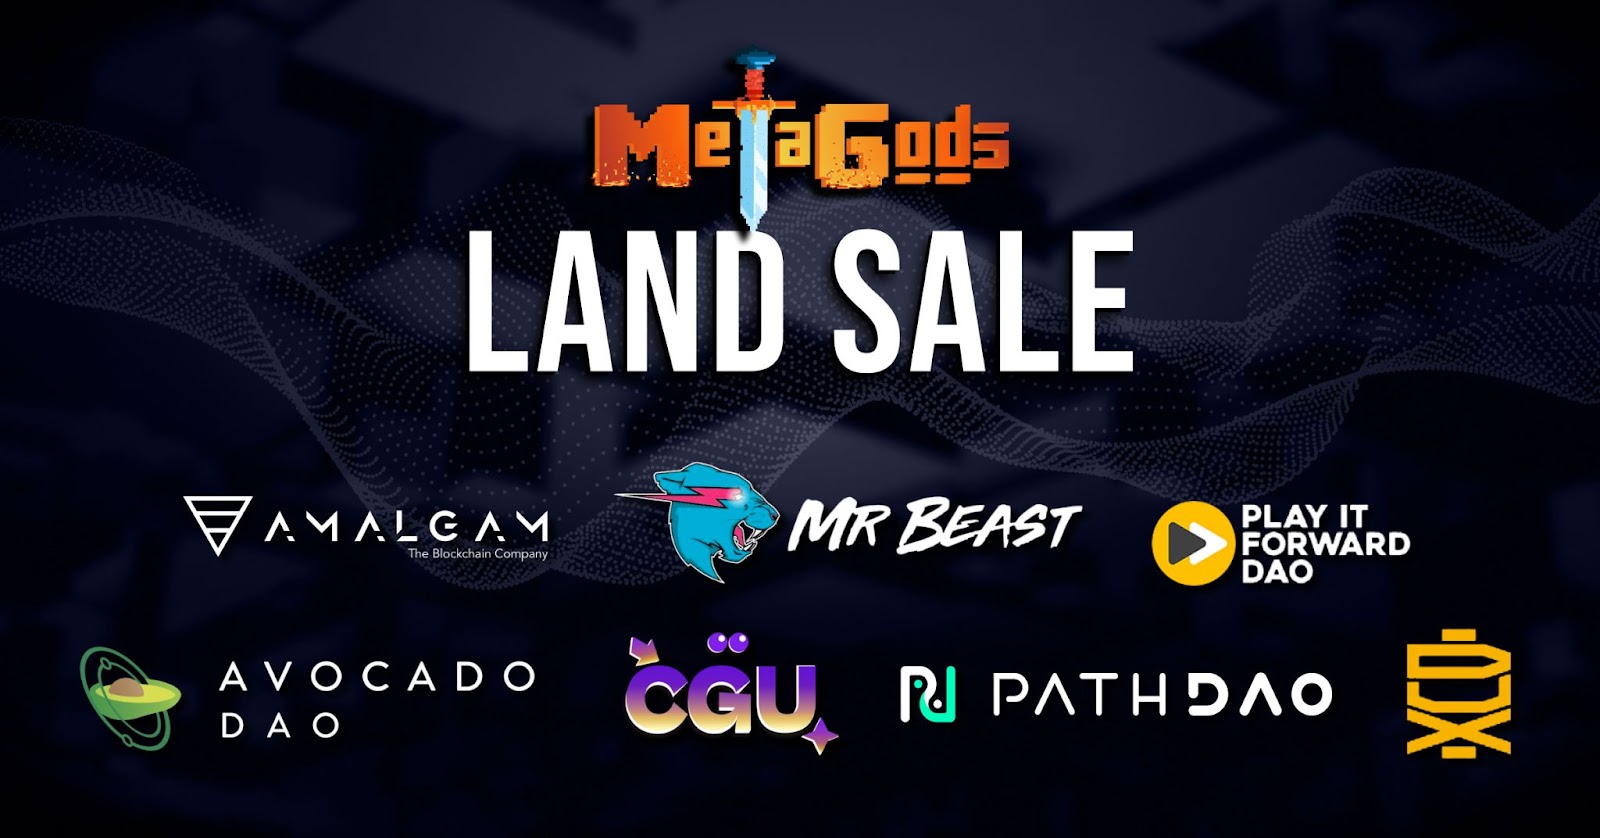 Avid Gamers Set to Own Lands as Metagods Announces Land Sale